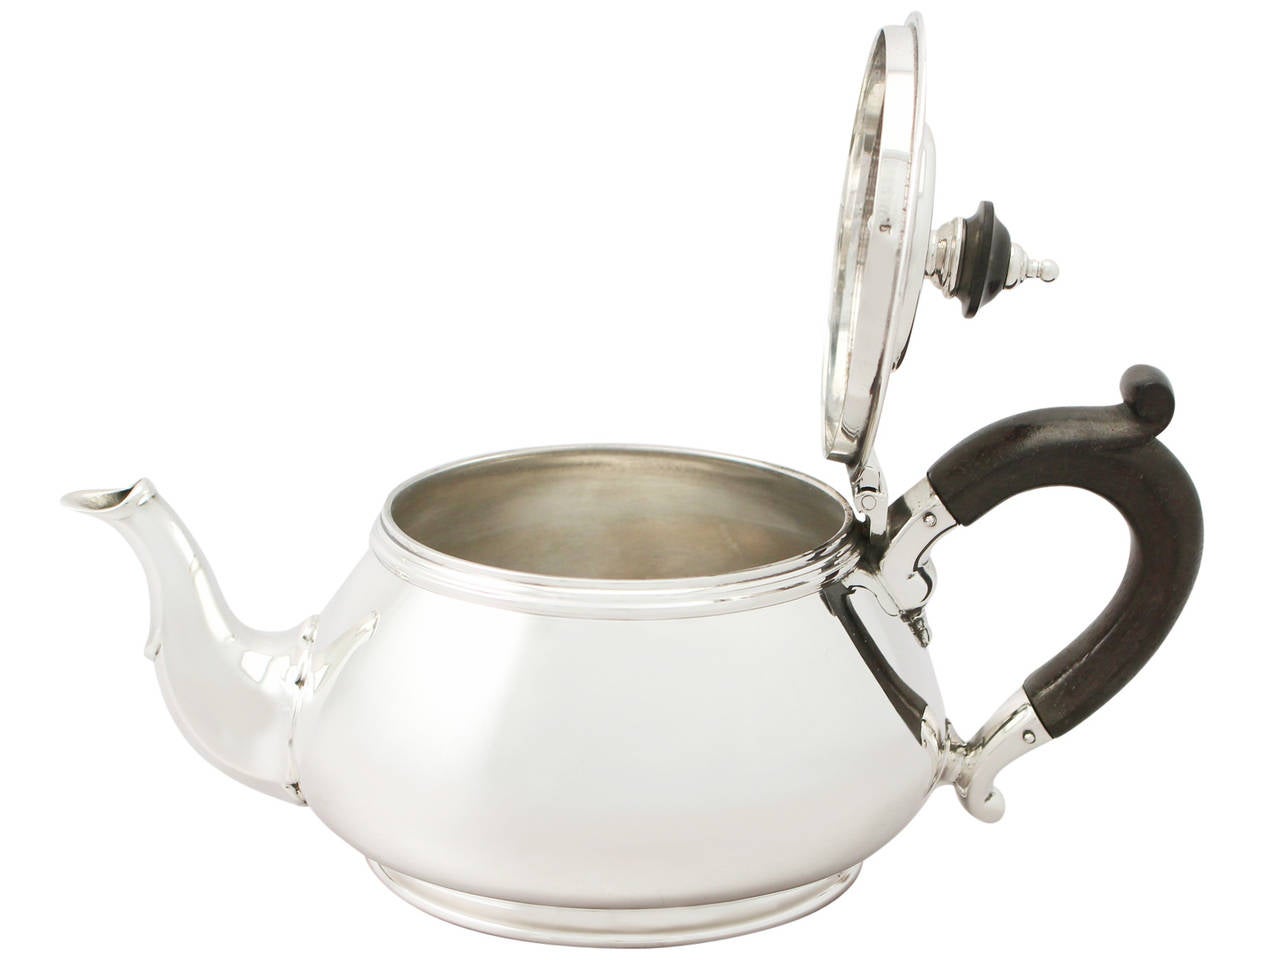 A fine and impressive antique George V English sterling silver three-piece bachelor tea service/set; an addition to our silver teaware collection.

This fine antique George V sterling silver three-piece bachelor tea set consists of a teapot, cream